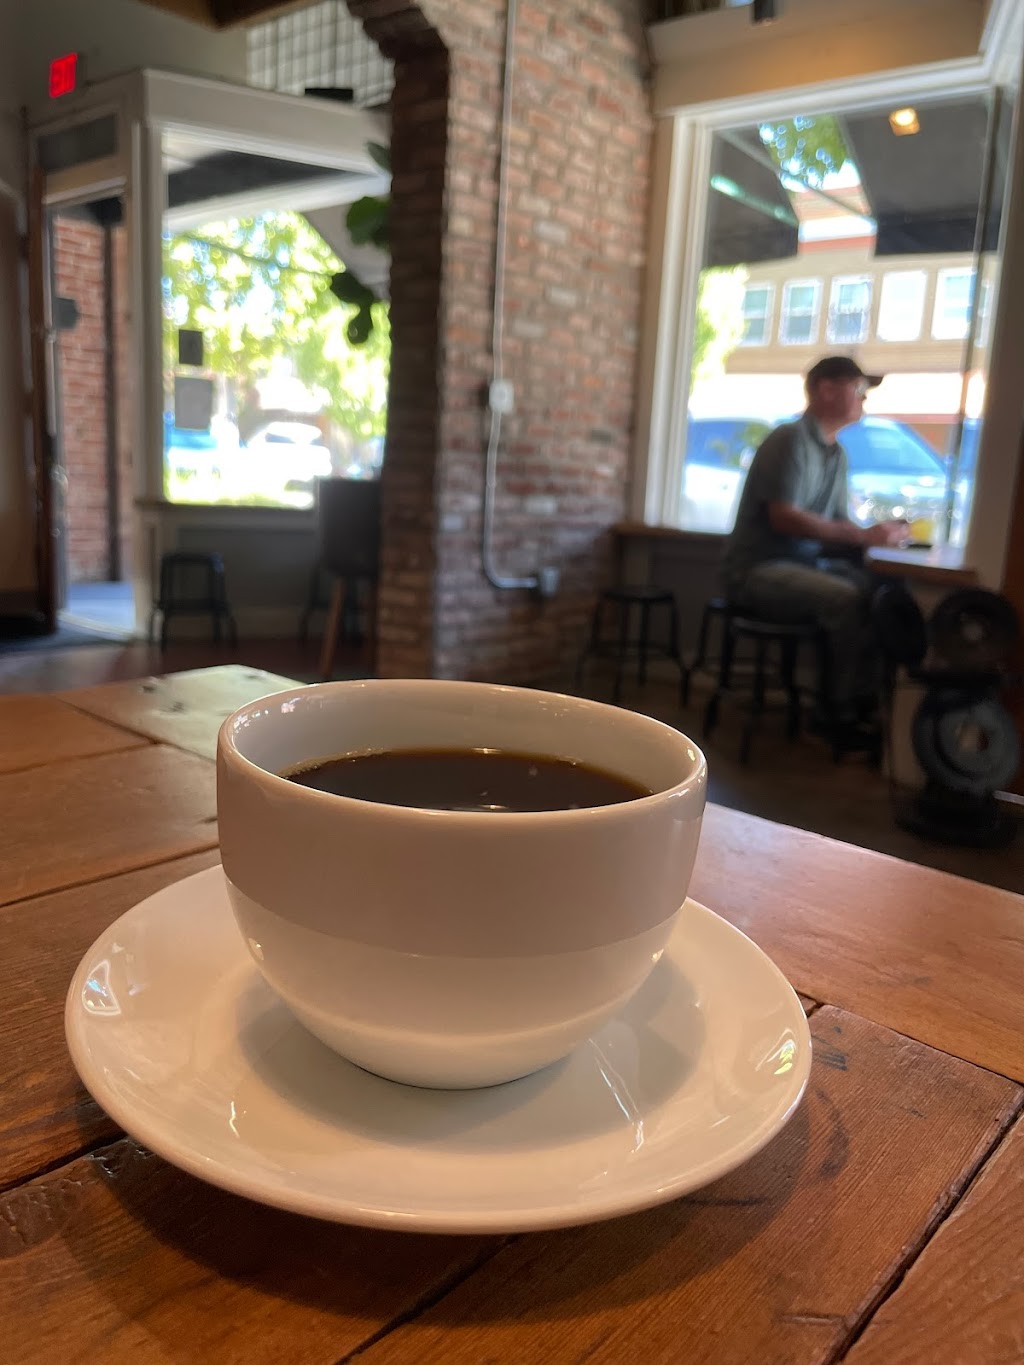 Fourscore Coffee | 327 Lincoln St, Roseville, CA 95678, USA | Phone: (916) 390-0367